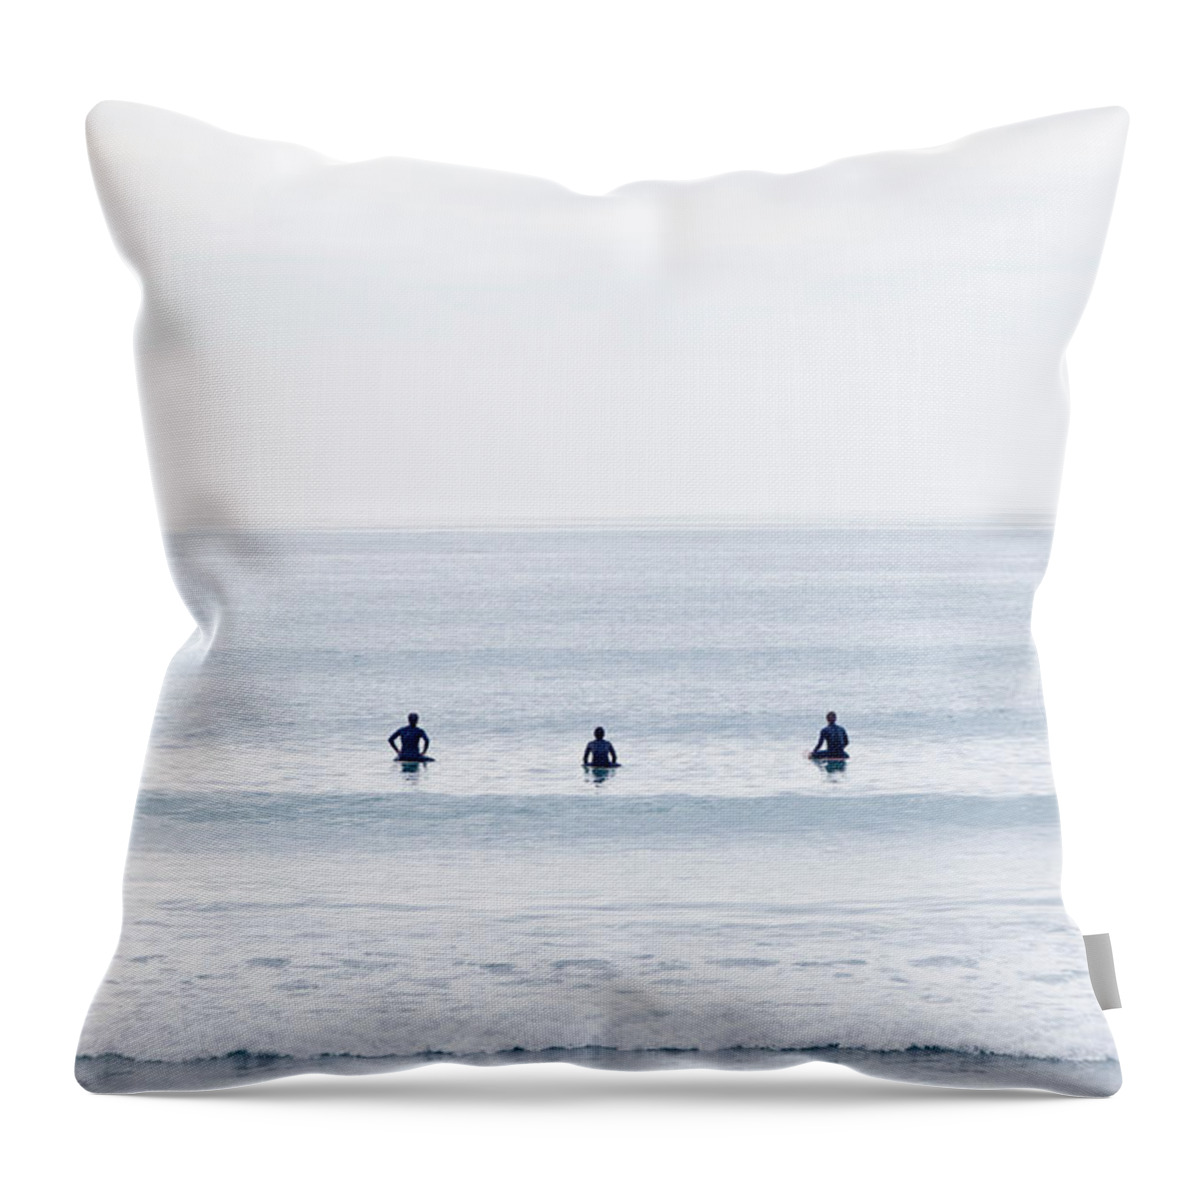 People Throw Pillow featuring the photograph Surfers Astride Boards Waiting For Wave by David Madison